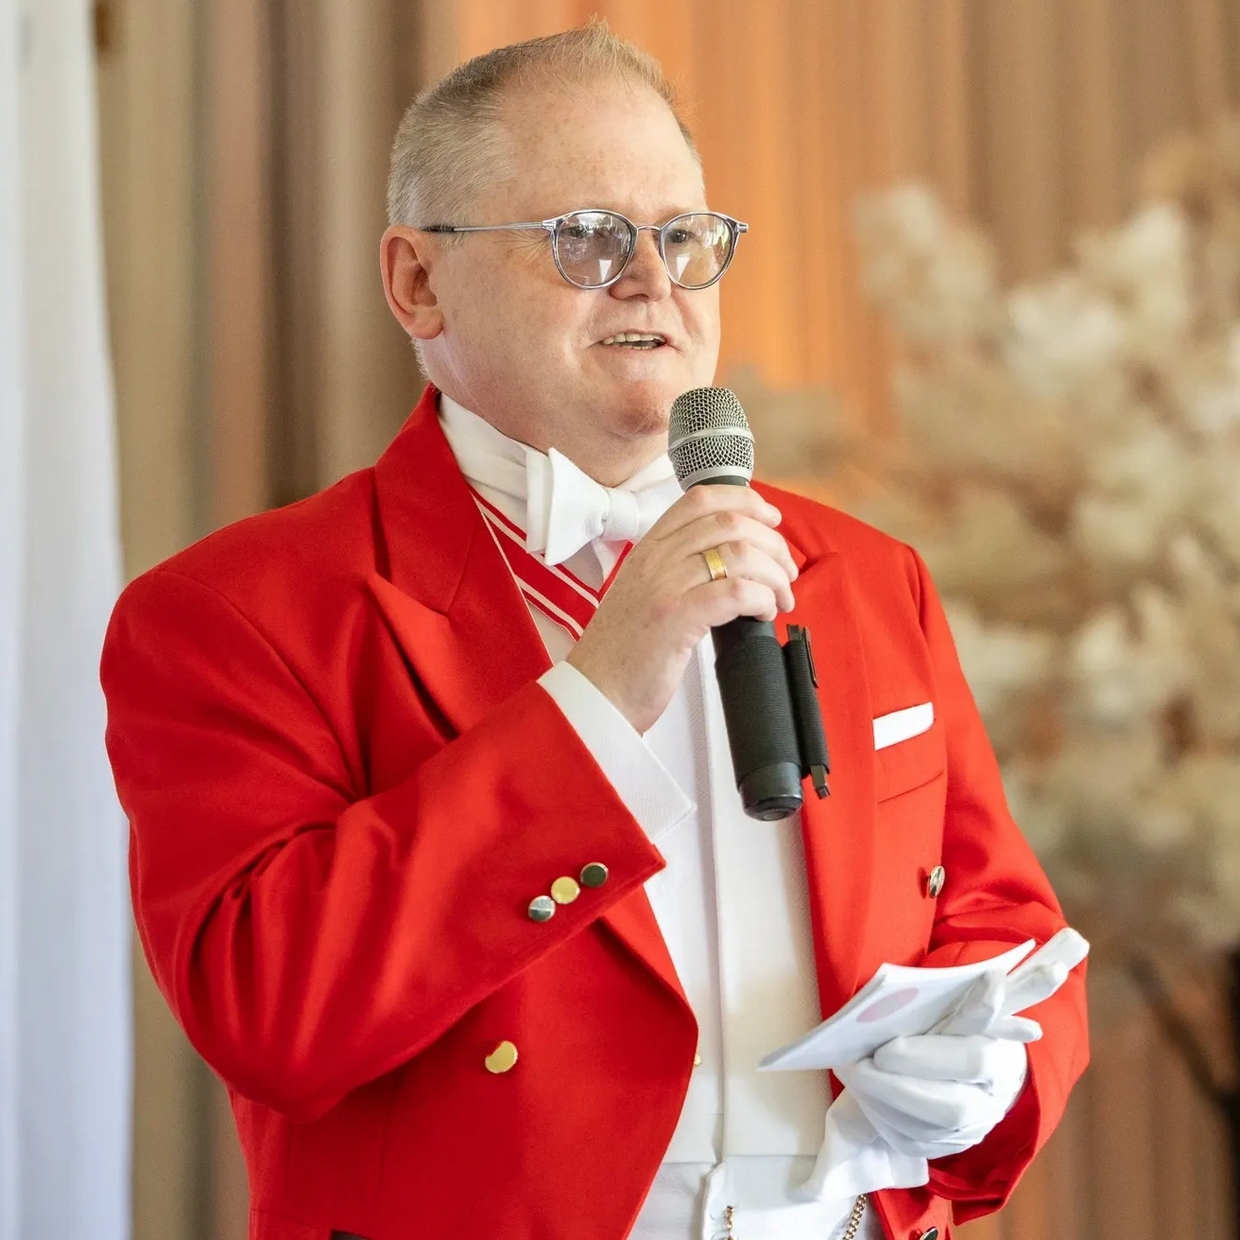 Toastmaster man in red jacket with microphone